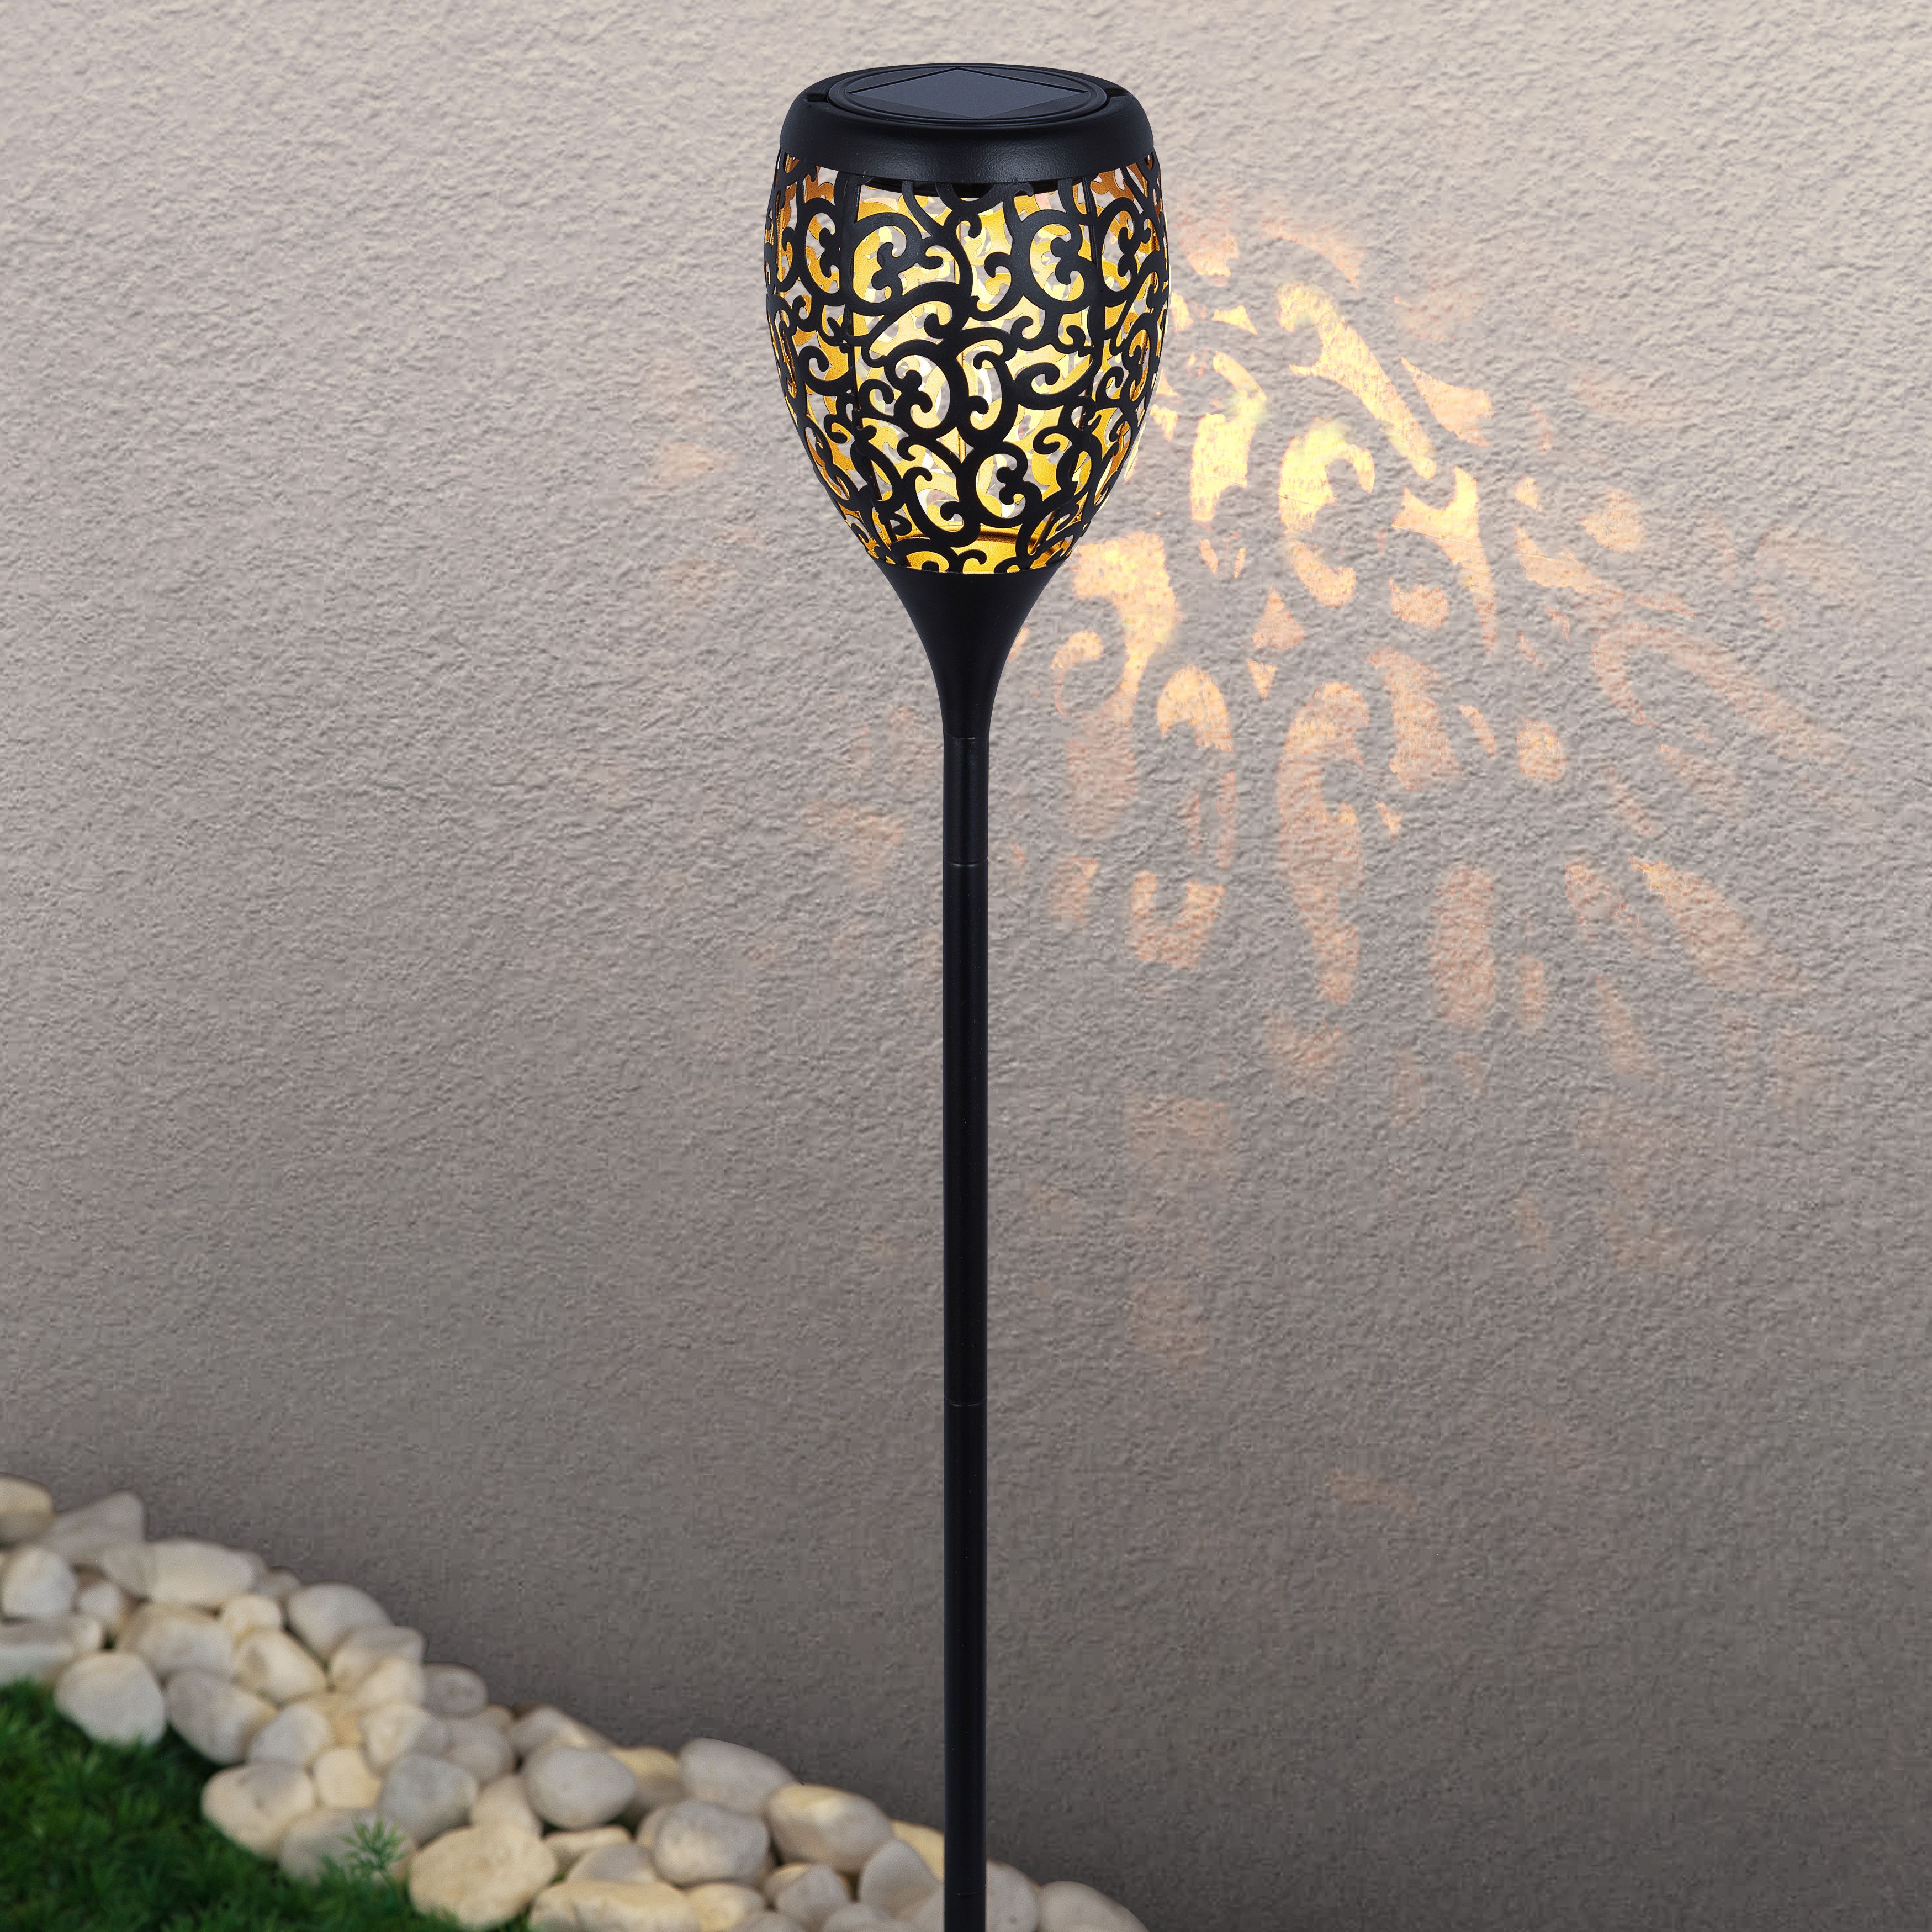 Cropani Black with gold effect interior Solar-powered Integrated LED ...